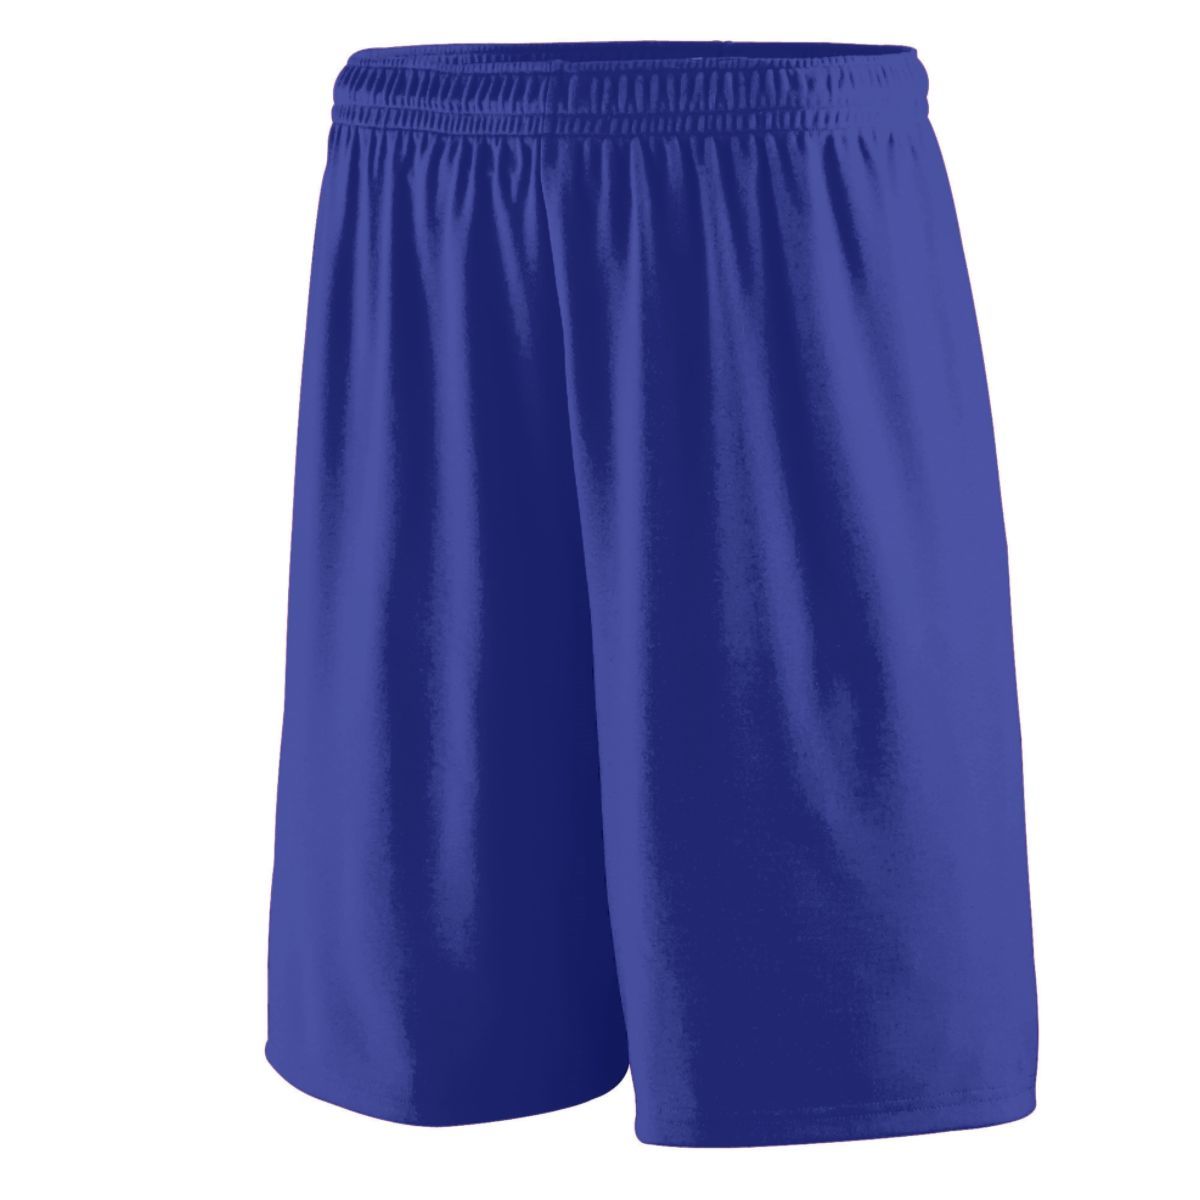 Augusta Sportswear Training Shorts in Purple  -Part of the Adult, Adult-Shorts, Augusta-Products product lines at KanaleyCreations.com